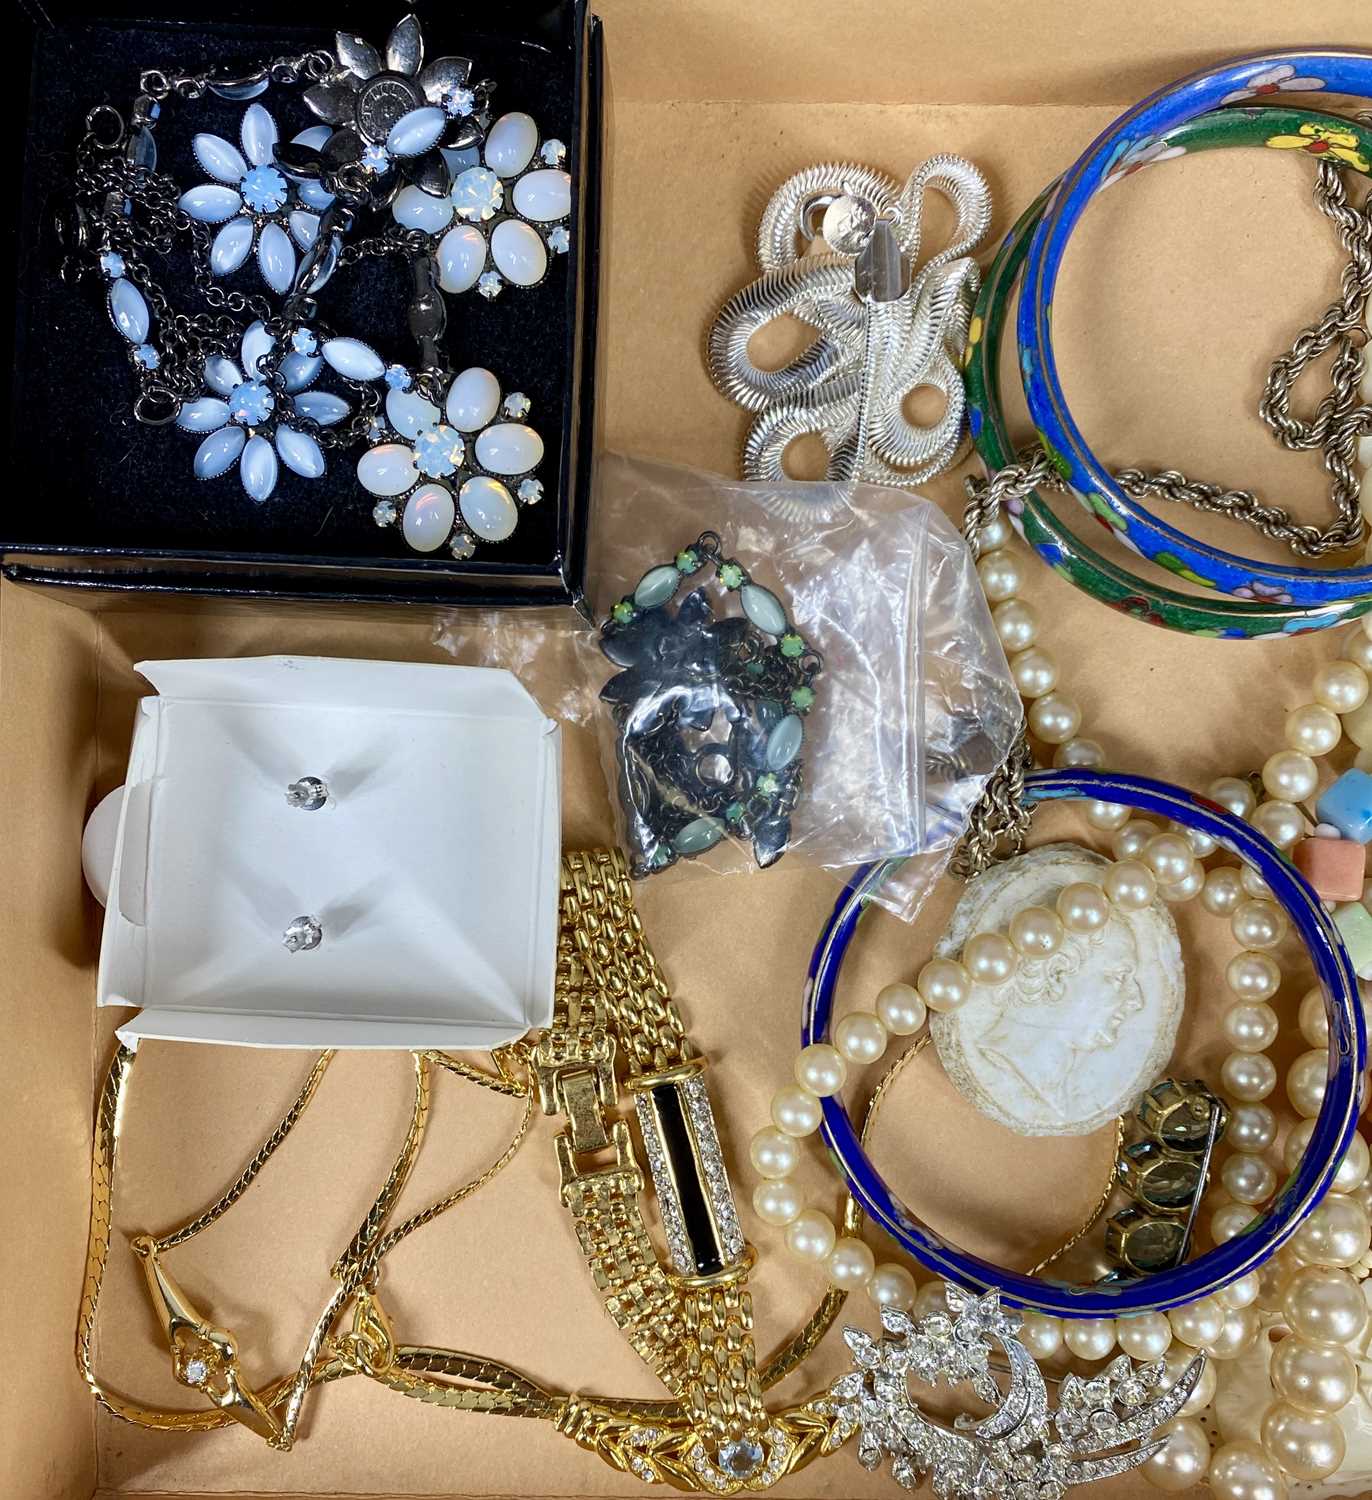 GROUP OF COSTUME & OTHER JEWELLERY including Cloisonne bangles, gold tone necklace and bracelets, - Image 2 of 3